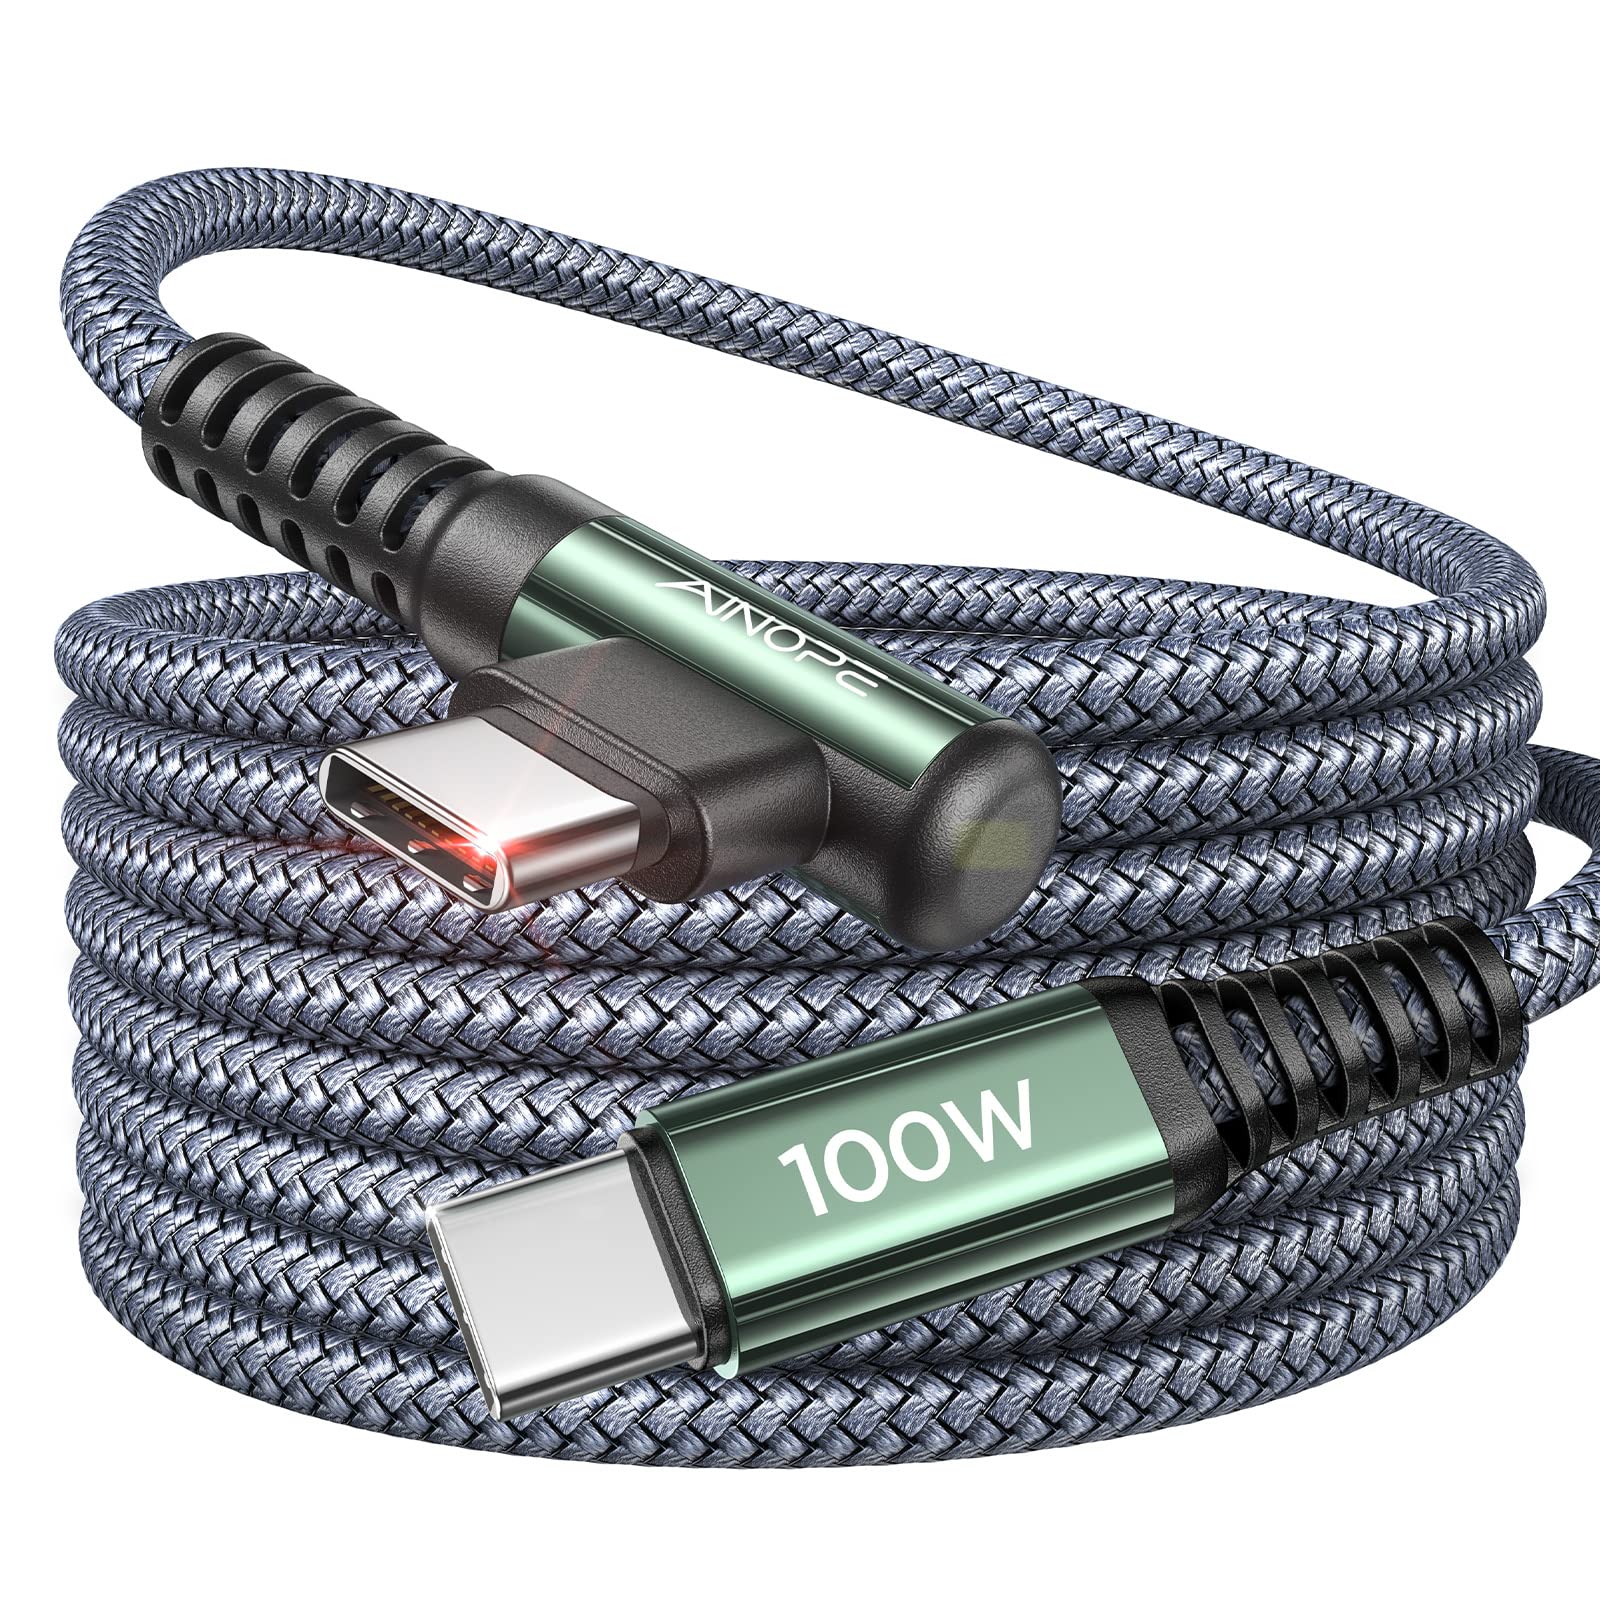 AINOPE 100W USB C to USB C Cable 10FT $5.97